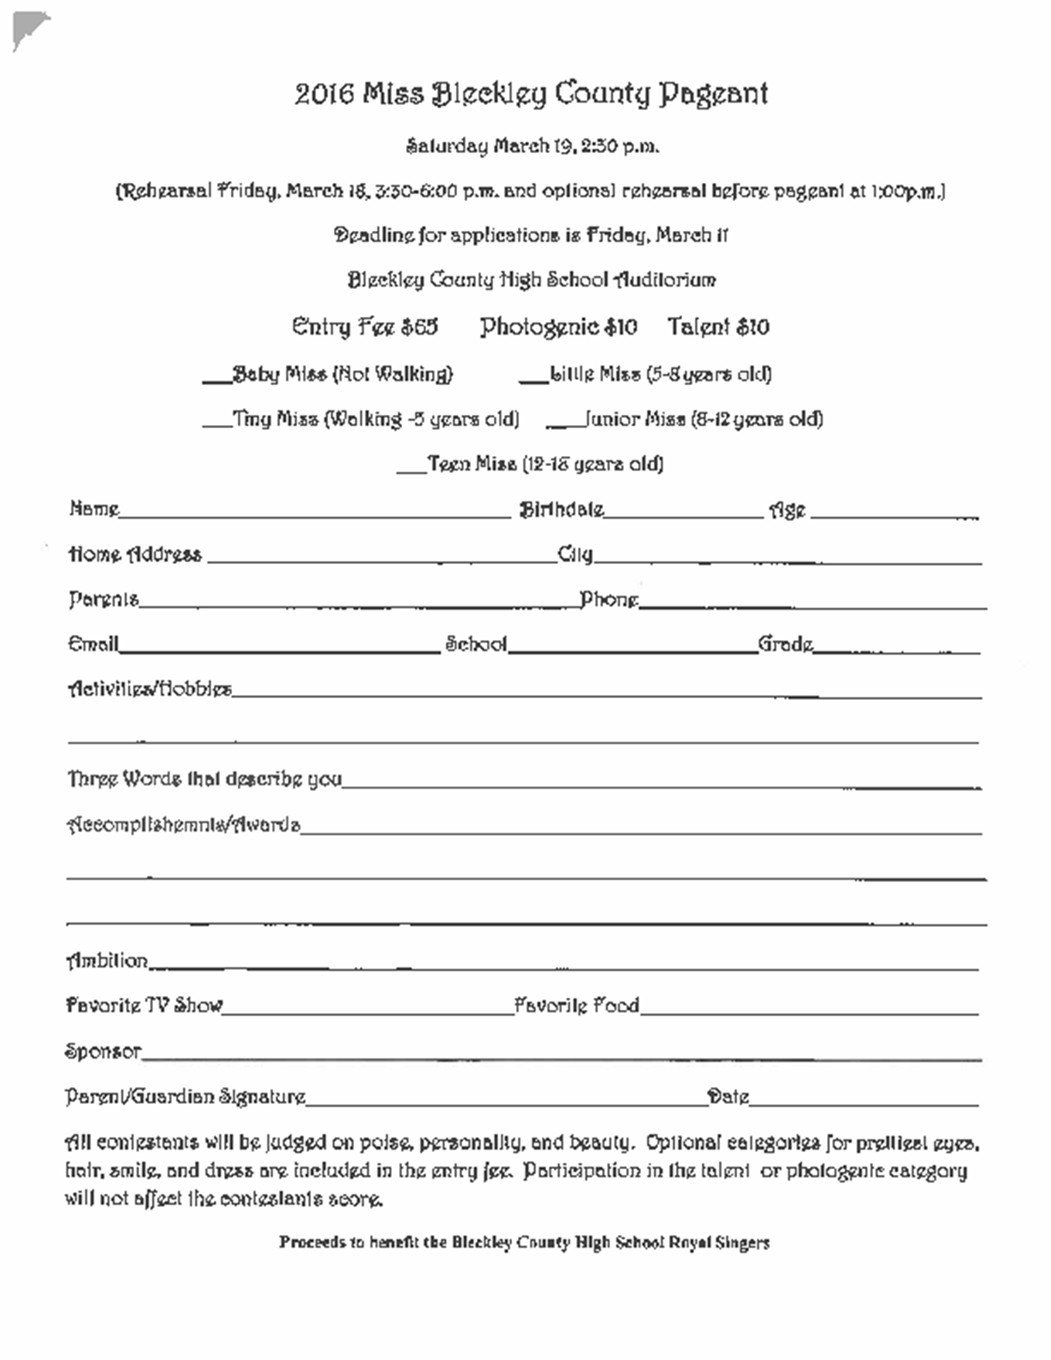 Miss Bleckley County Pageant March 19 Events